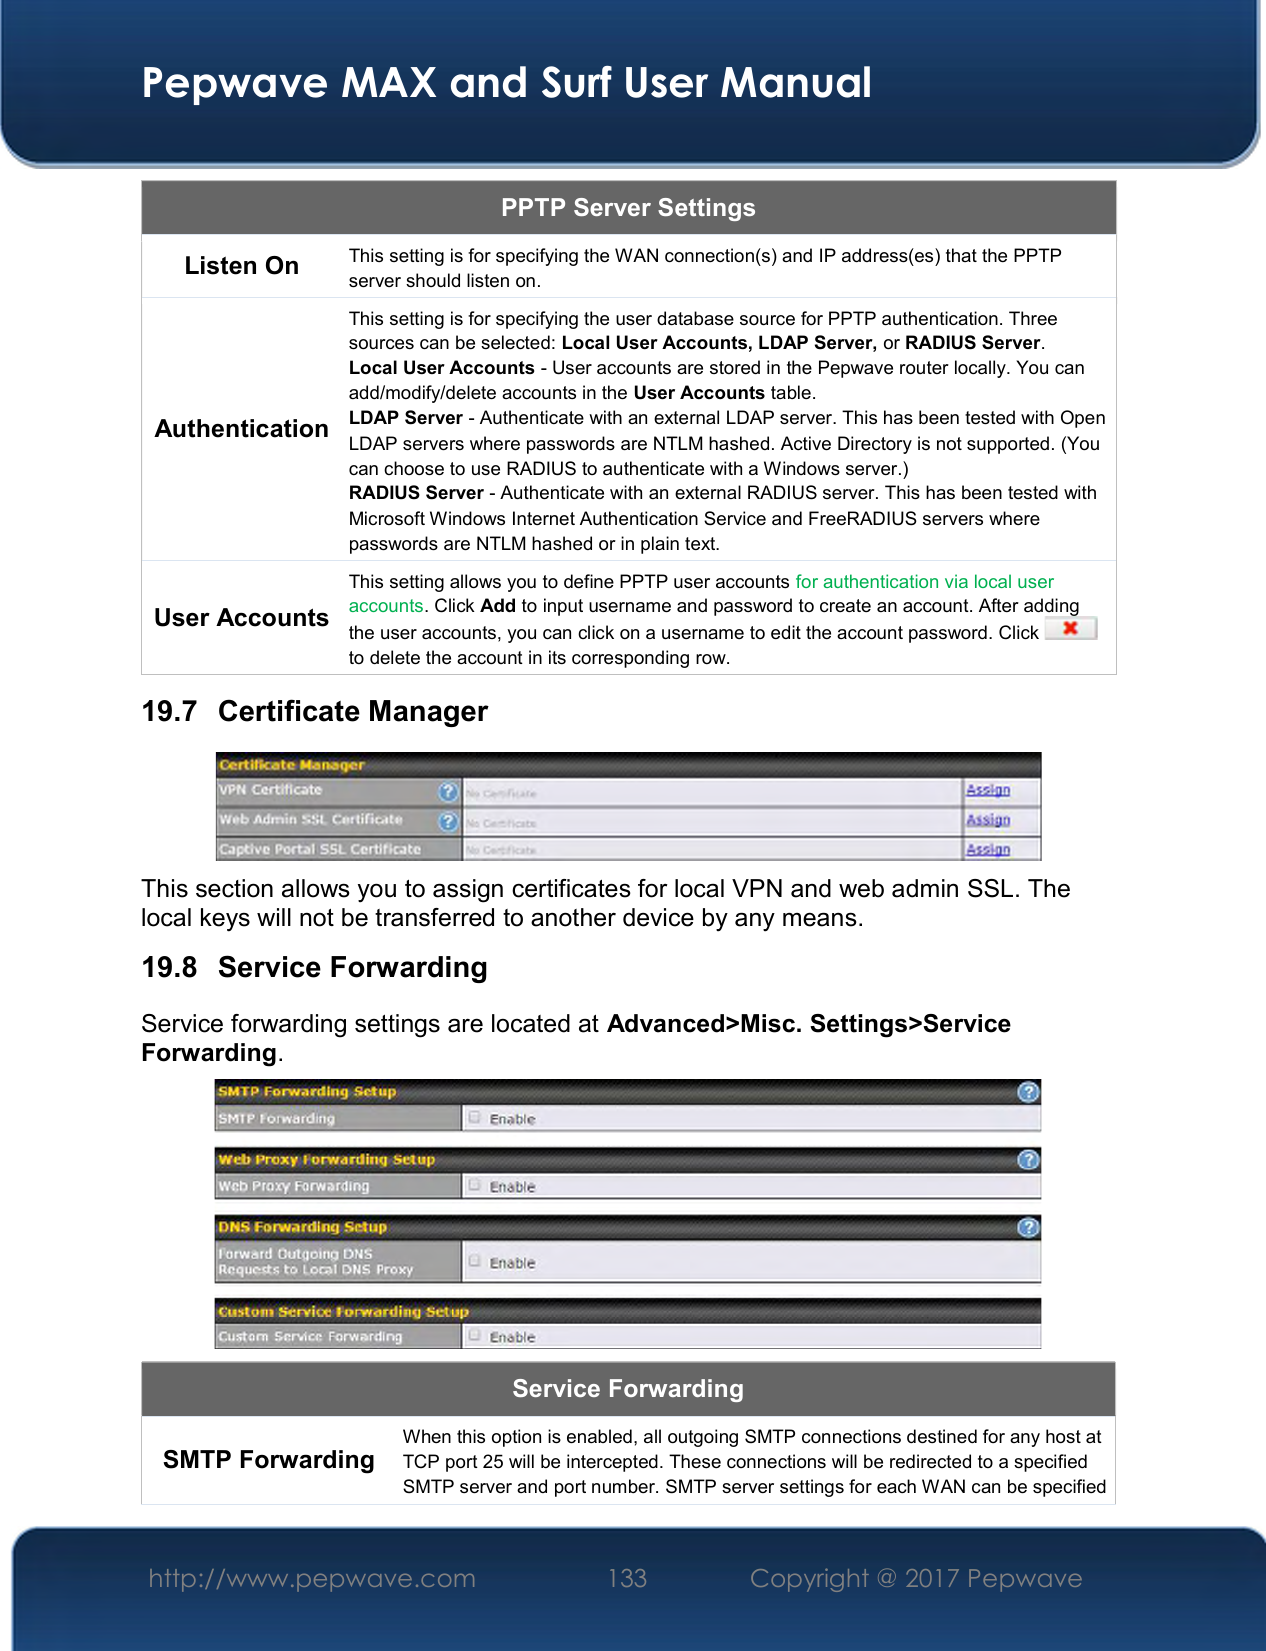  Pepwave MAX and Surf User Manual http://www.pepwave.com  133    Copyright @ 2017 Pepwave   PPTP Server Settings Listen On  This setting is for specifying the WAN connection(s) and IP address(es) that the PPTP server should listen on. Authentication This setting is for specifying the user database source for PPTP authentication. Three sources can be selected: Local User Accounts, LDAP Server, or RADIUS Server. Local User Accounts - User accounts are stored in the Pepwave router locally. You can add/modify/delete accounts in the User Accounts table. LDAP Server - Authenticate with an external LDAP server. This has been tested with Open LDAP servers where passwords are NTLM hashed. Active Directory is not supported. (You can choose to use RADIUS to authenticate with a Windows server.) RADIUS Server - Authenticate with an external RADIUS server. This has been tested with Microsoft Windows Internet Authentication Service and FreeRADIUS servers where passwords are NTLM hashed or in plain text. User Accounts This setting allows you to define PPTP user accounts for authentication via local user accounts. Click Add to input username and password to create an account. After adding the user accounts, you can click on a username to edit the account password. Click   to delete the account in its corresponding row. 19.7  Certificate Manager  This section allows you to assign certificates for local VPN and web admin SSL. The local keys will not be transferred to another device by any means. 19.8  Service Forwarding Service forwarding settings are located at Advanced&gt;Misc. Settings&gt;Service Forwarding.  Service Forwarding SMTP Forwarding  When this option is enabled, all outgoing SMTP connections destined for any host at TCP port 25 will be intercepted. These connections will be redirected to a specified SMTP server and port number. SMTP server settings for each WAN can be specified 